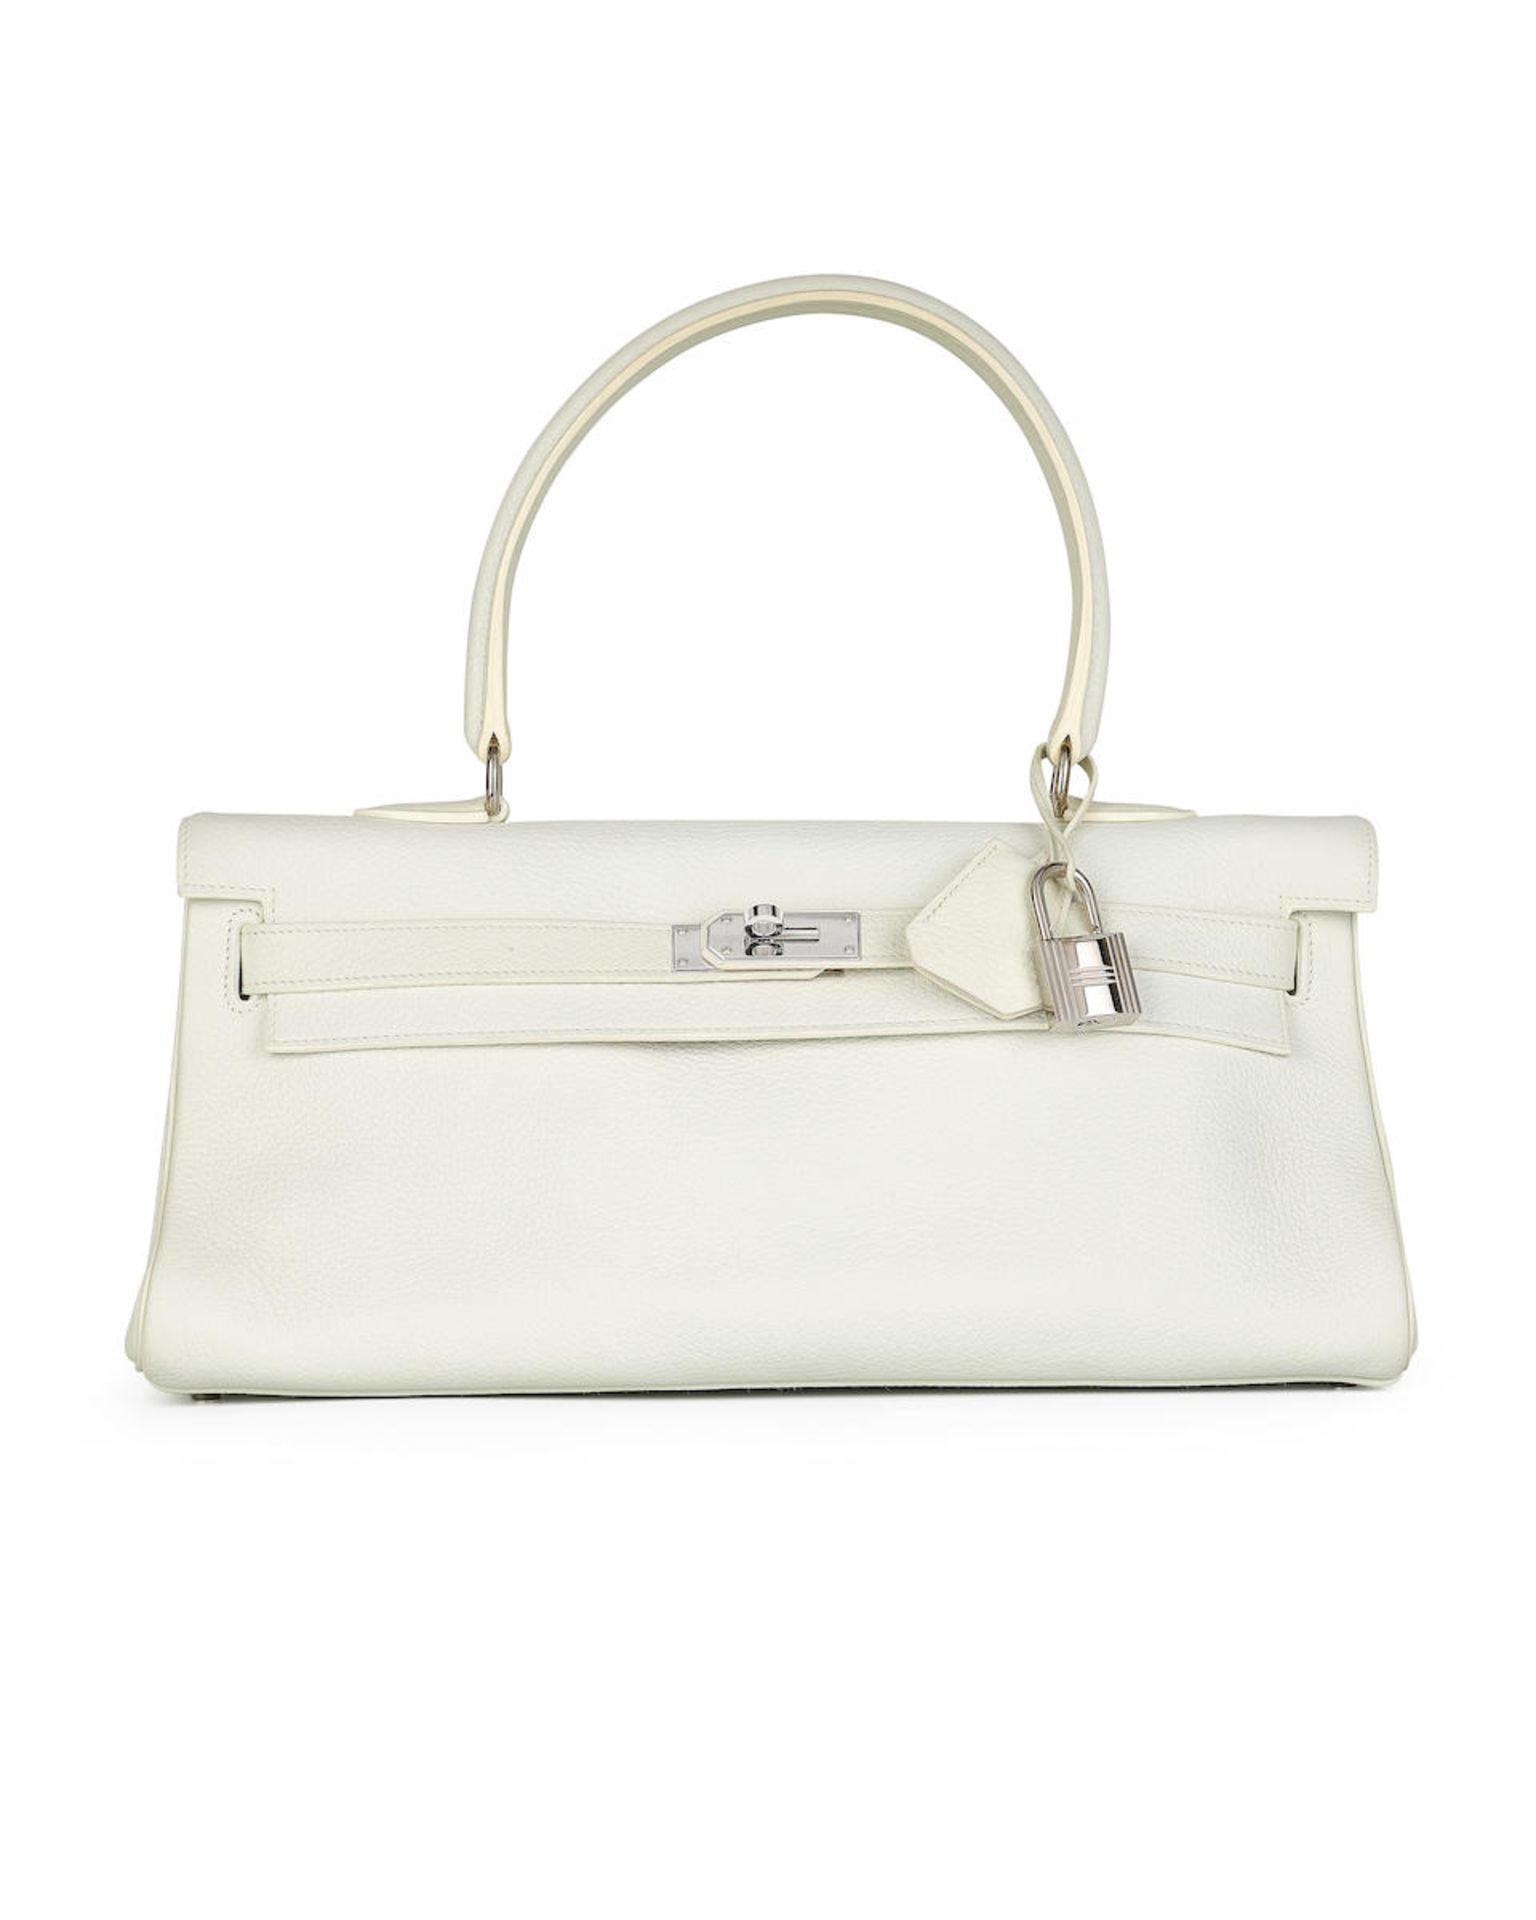 HERMÈS: SNOW WHITE TAURILLON CLEMENCE SHOULDER KELLY 42 WITH PALLADIUM HARDWARE (Includes p...